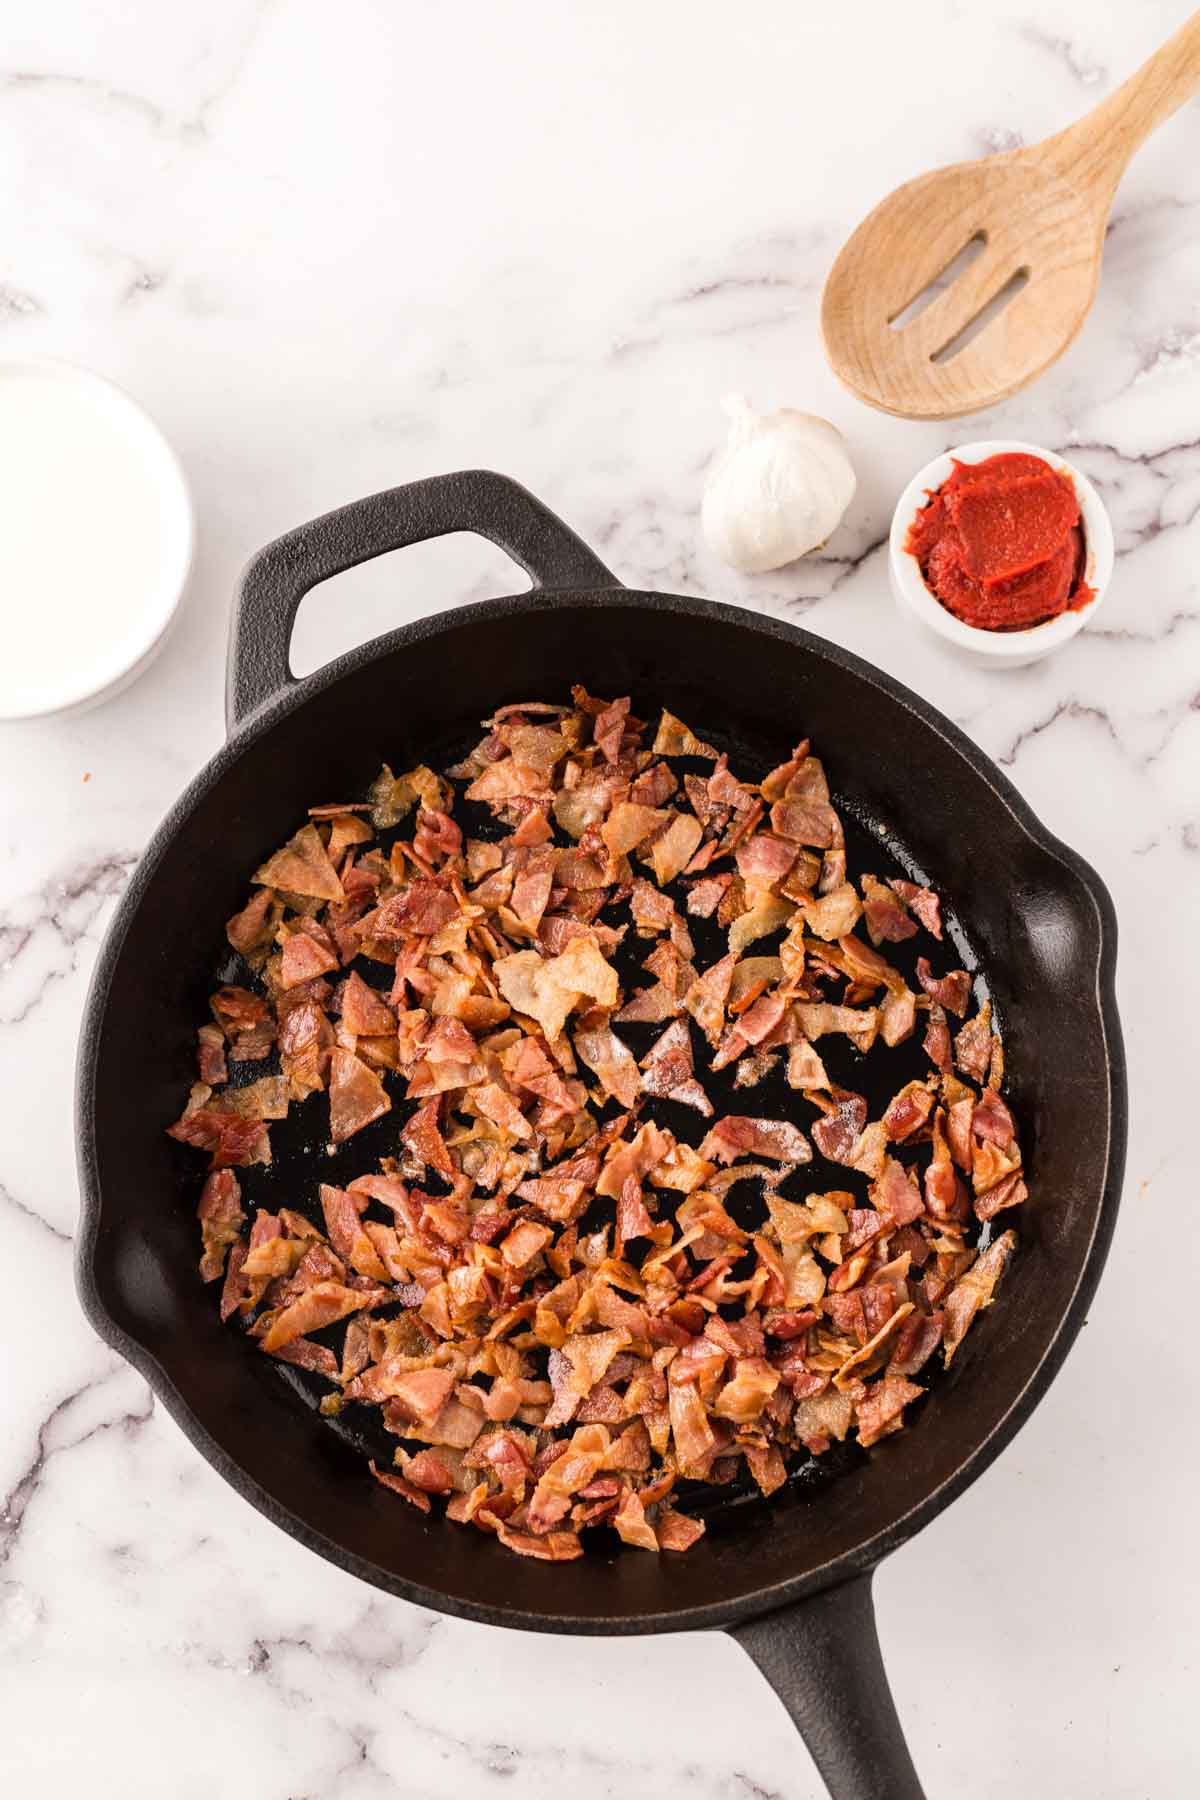 Bacon pieces cooking in a cast iron skillet.